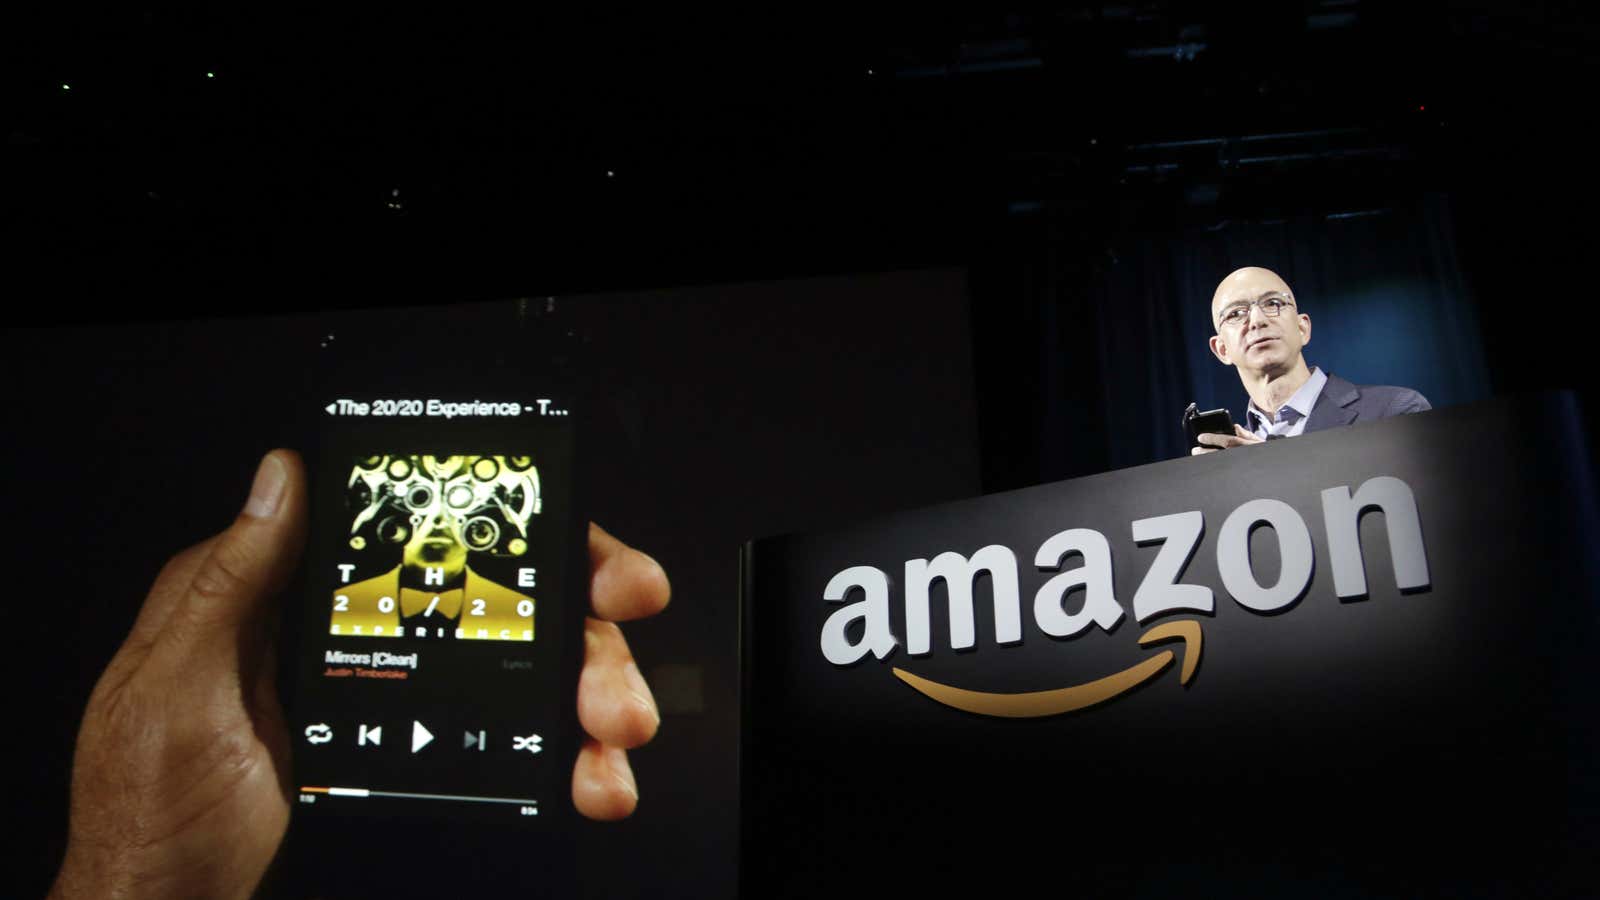 Amazon reports strong fourth quarter earnings, surpassing analysts’ expectations.